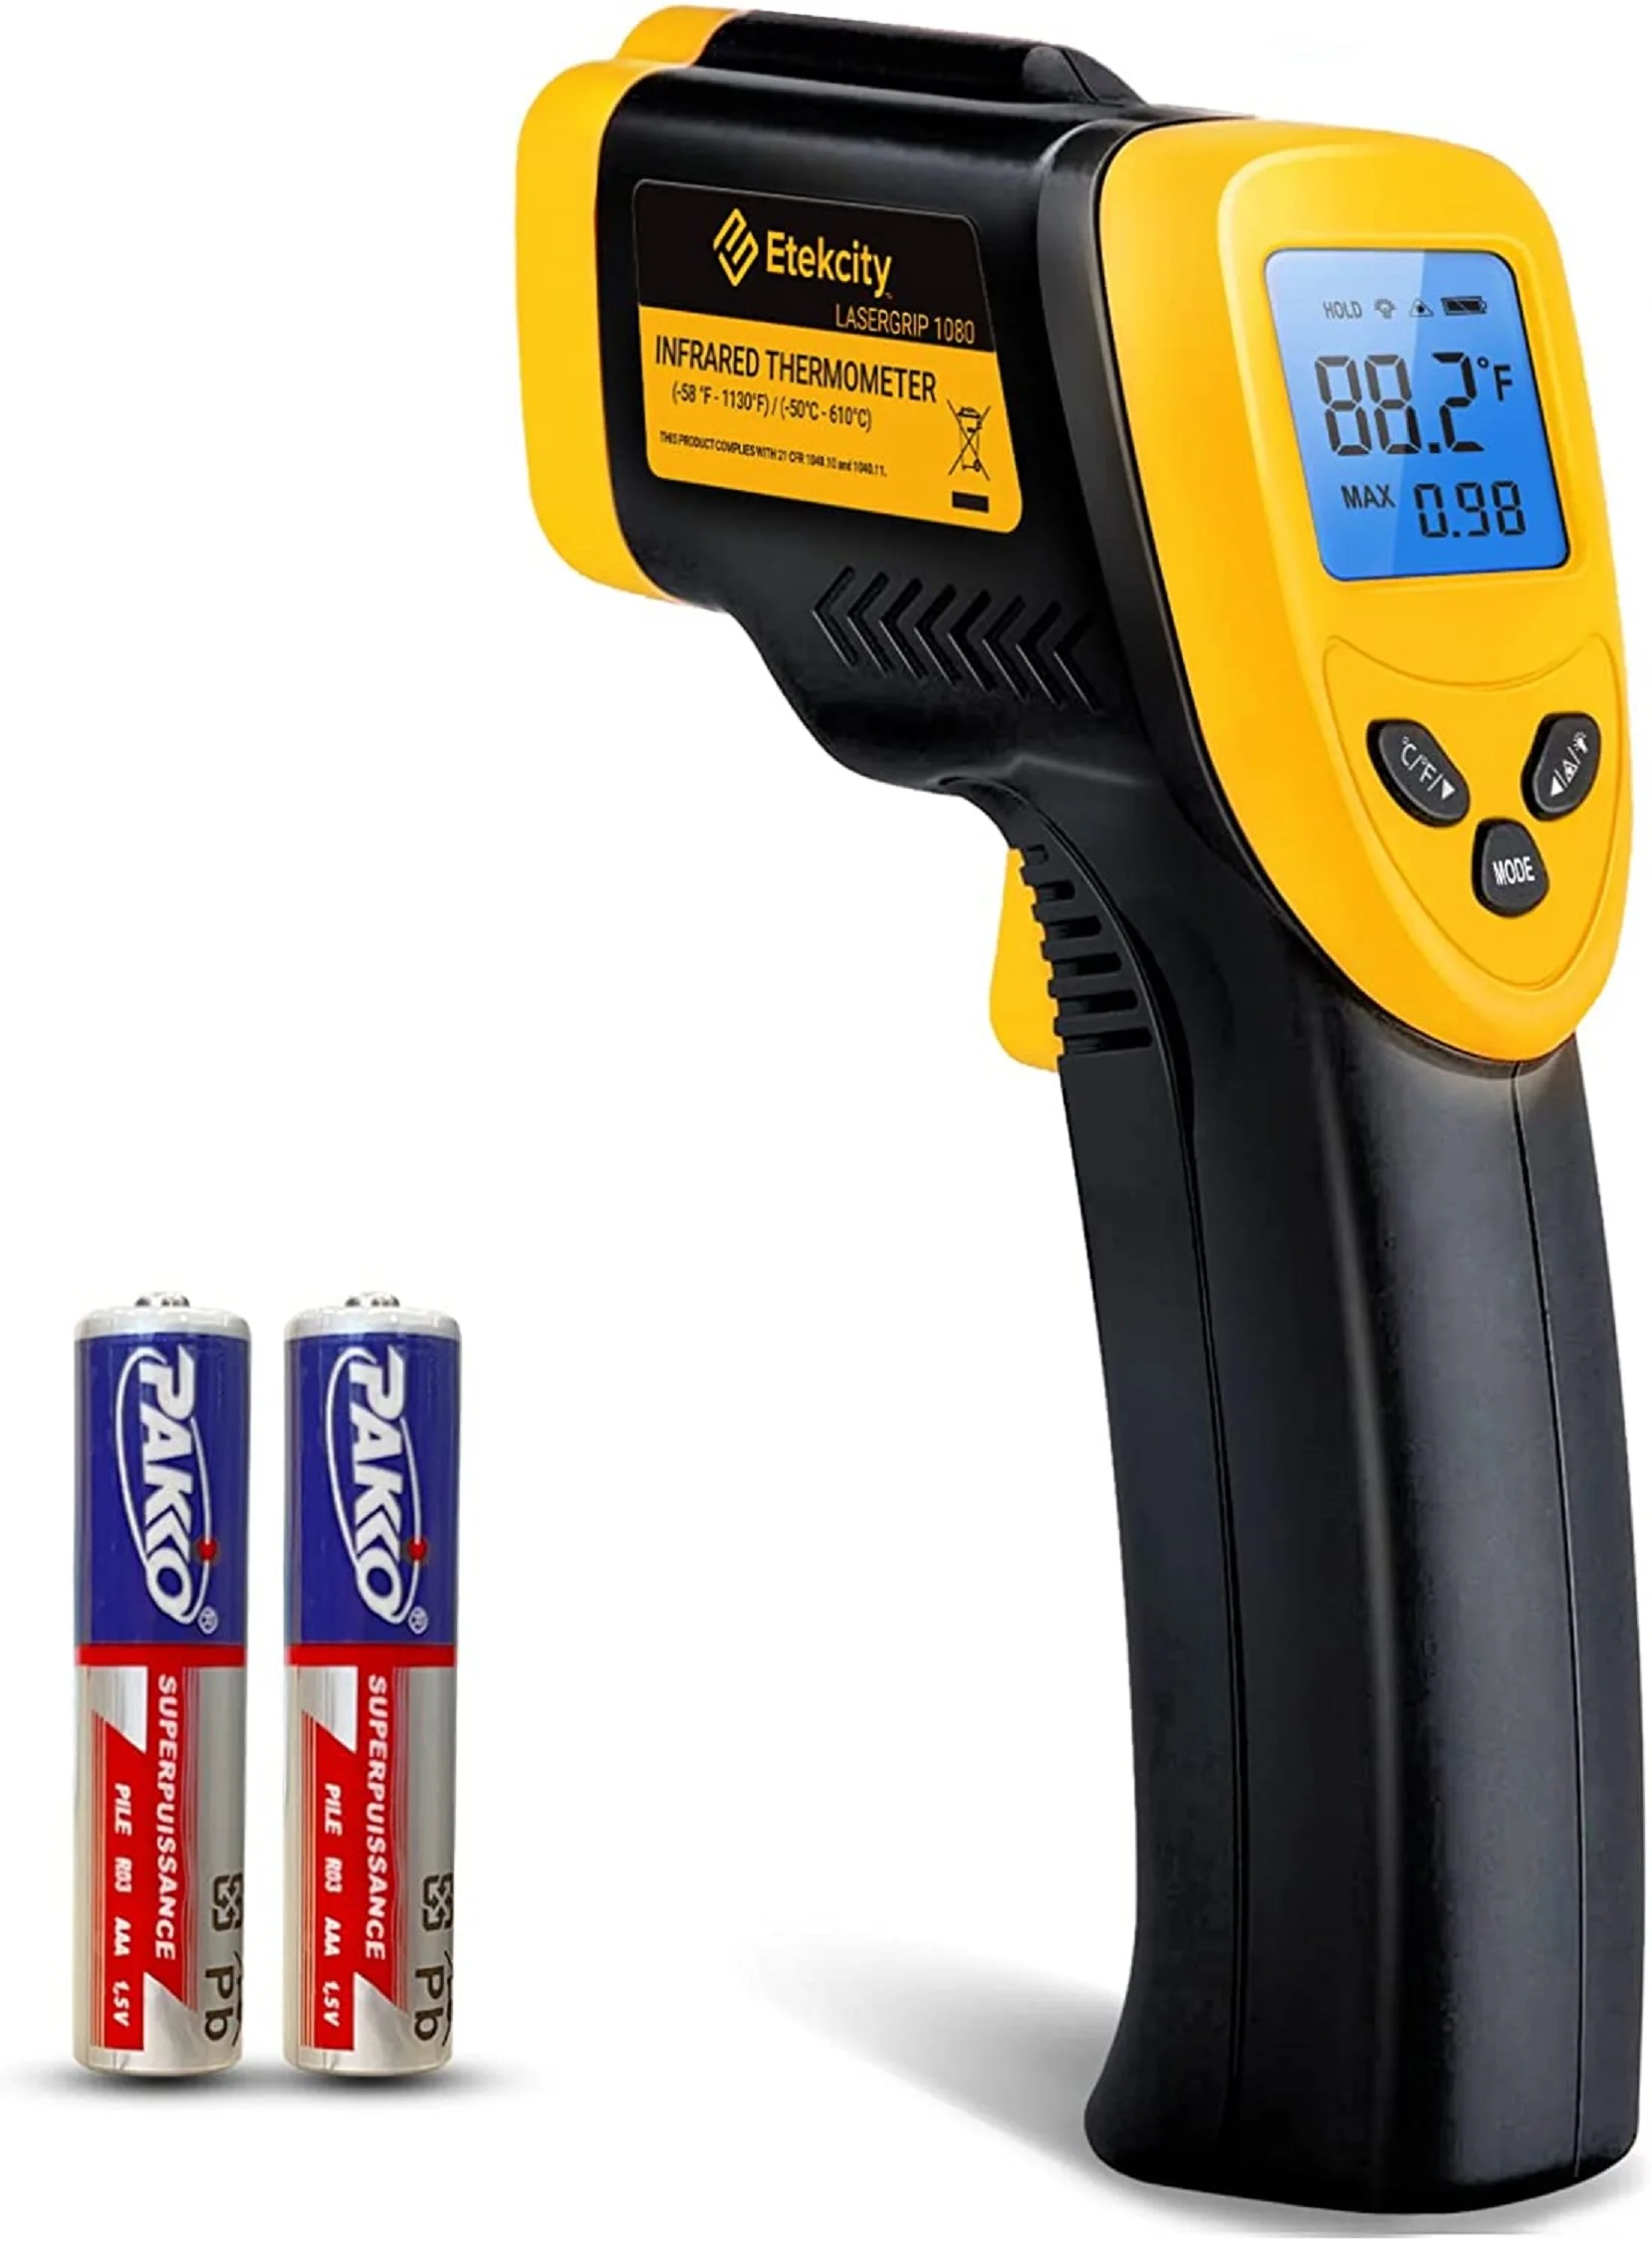 

Discount Sales on Etekcity Infrared Thermometer 1080, Heat Temperature Temp Gun for Cooking